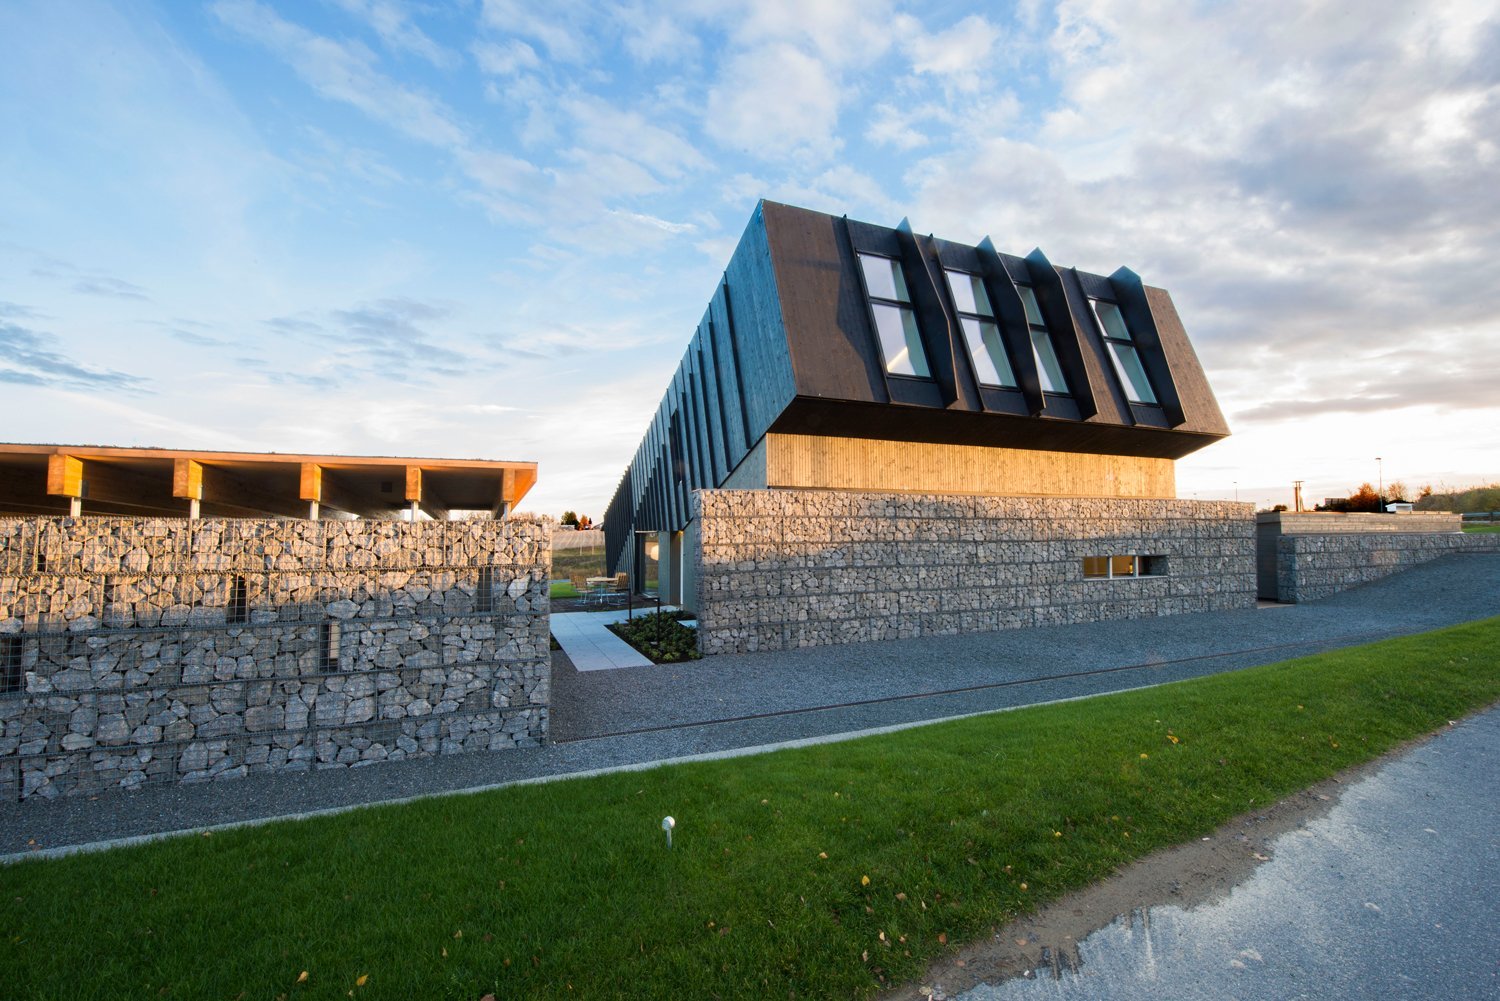 Norwegian house produces 2 times more energy than consumes